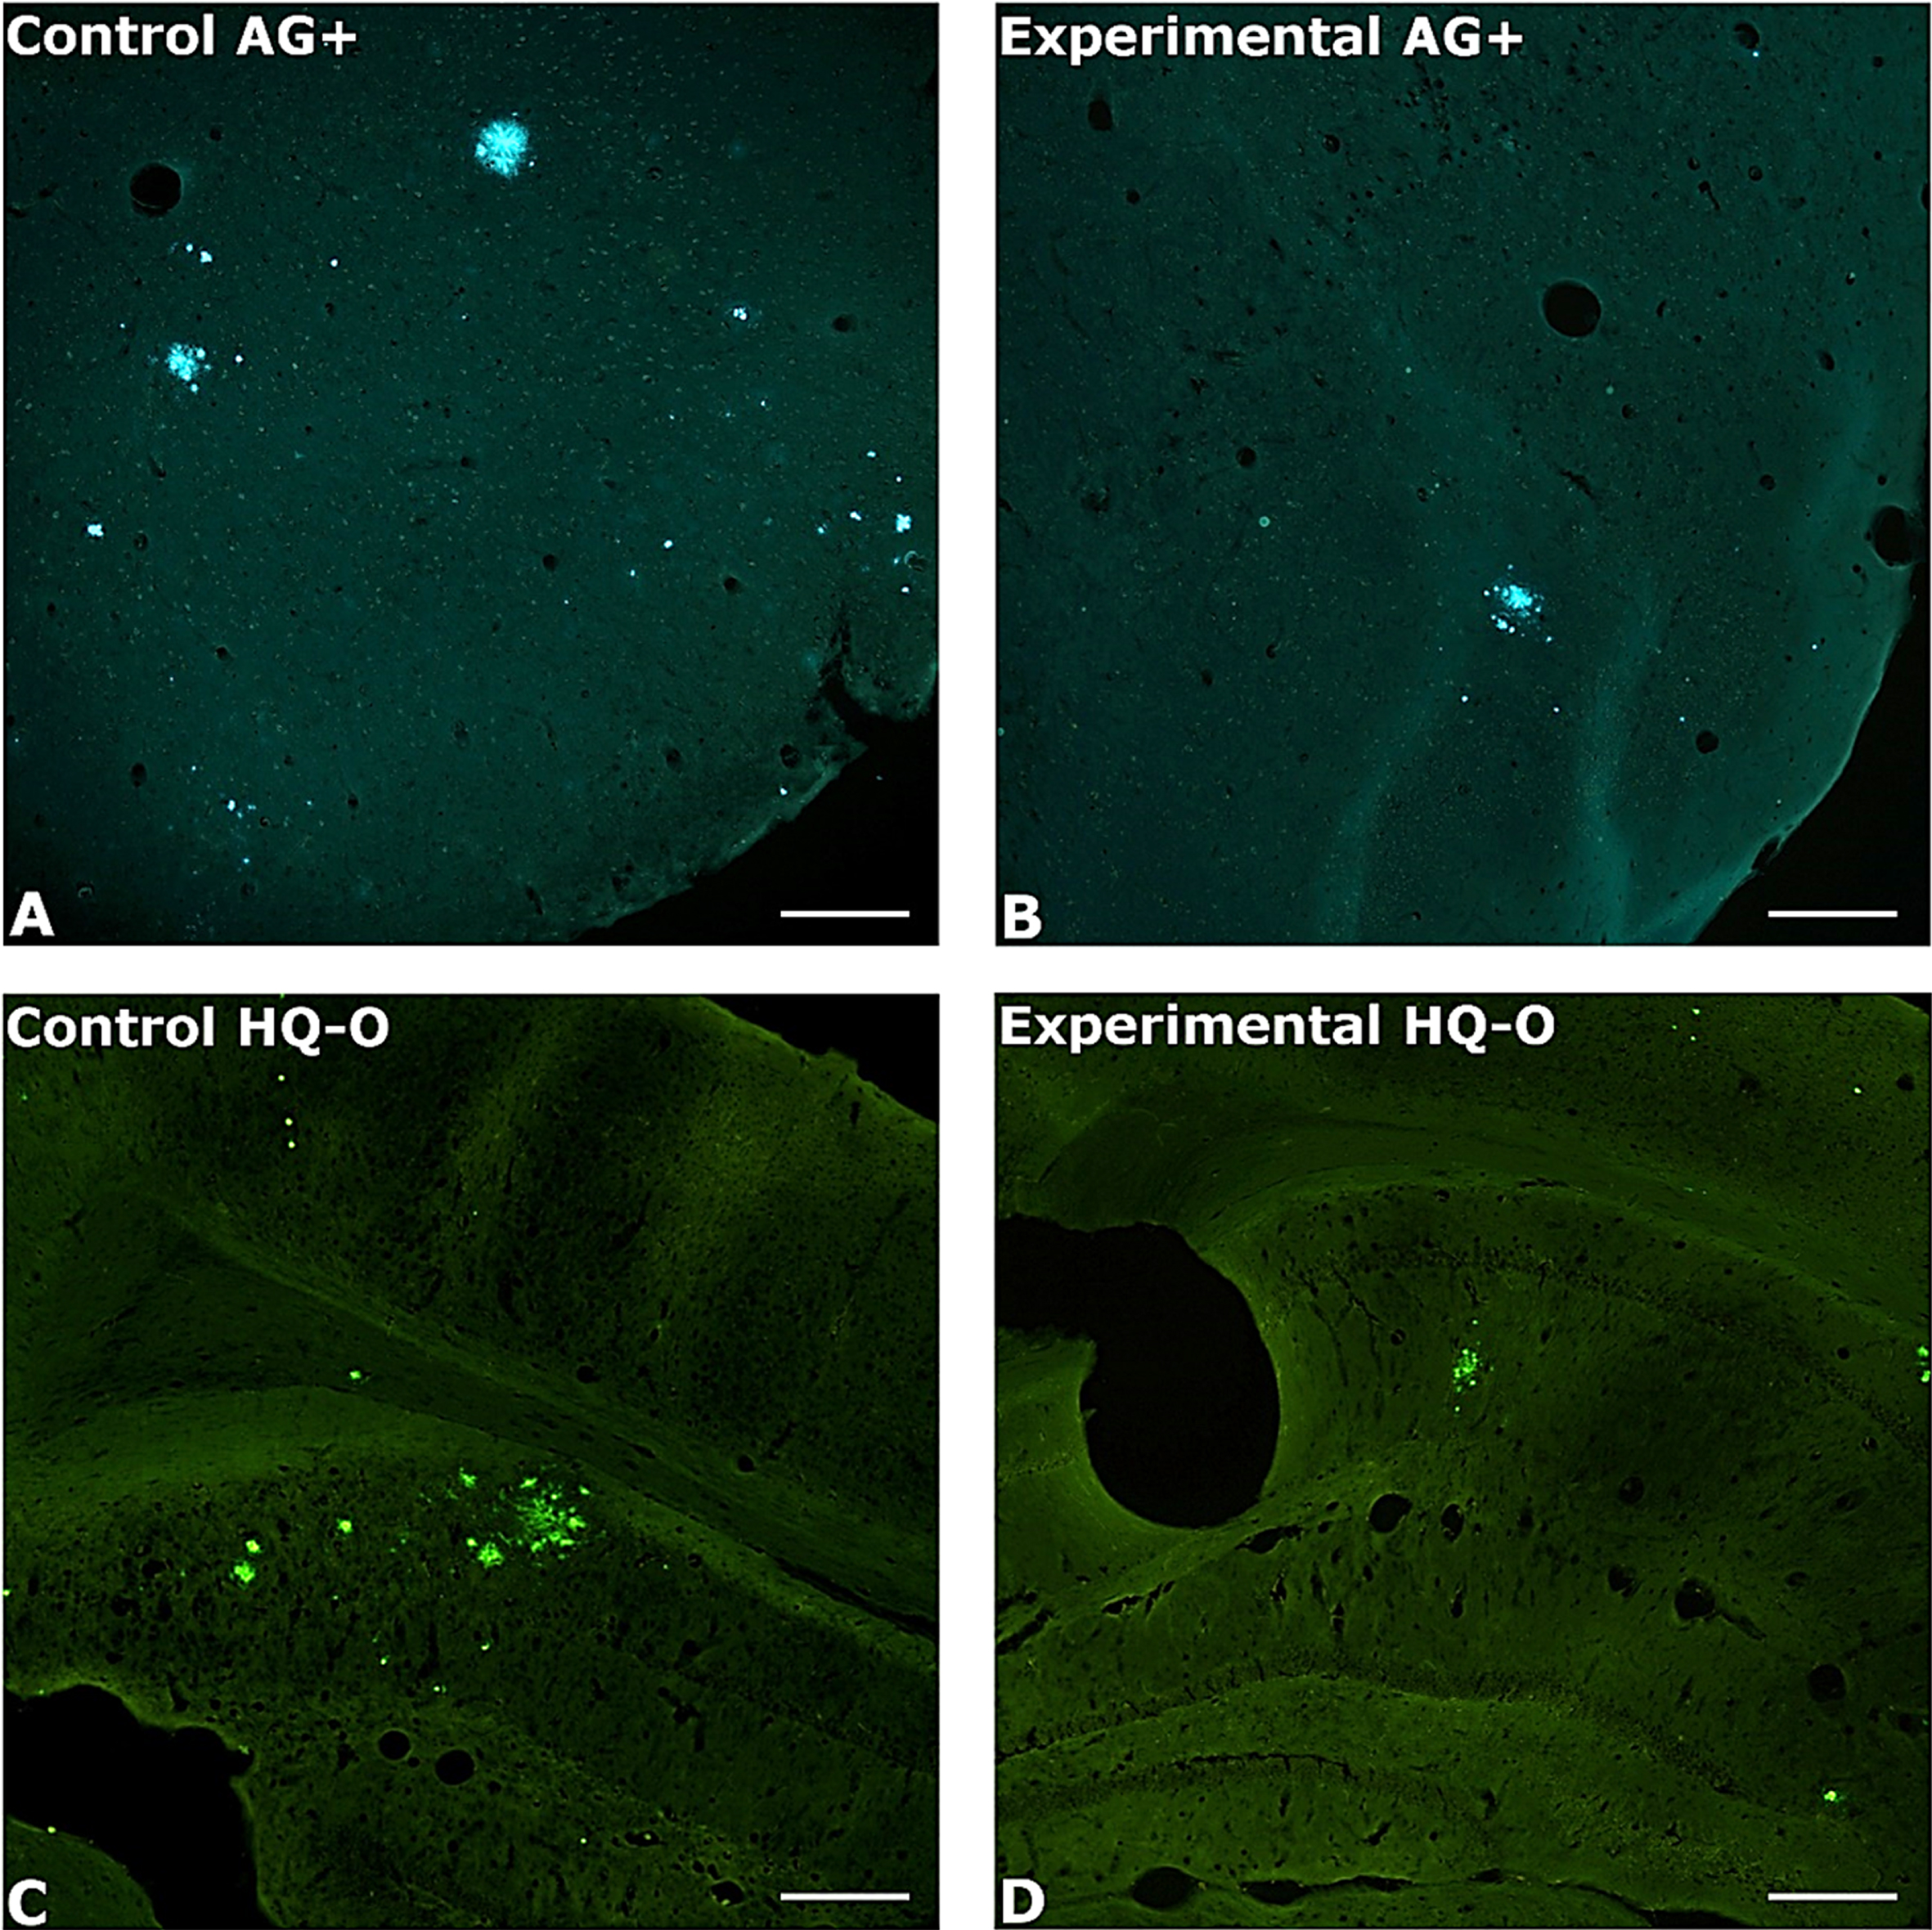 Photomicrography of amyloid plaques in untreated and treated mice. Photomicrographs illustrate the typical differences in amyloid plaque numbers and areas in control (left column) and PAA treated (right column) AβPP/Tau mice. Amyloid plaques were localized by staining with either AG (top row) or HQ-O (bottom row). Shown are A, B) perirhinal cortex, C) dorsal hippocampus, and D) ventral sensory-motor cortex. Amylo-Glo and HQ-O required ultraviolet or blue light excitation, respectively. Magnification bars = 600 μm.